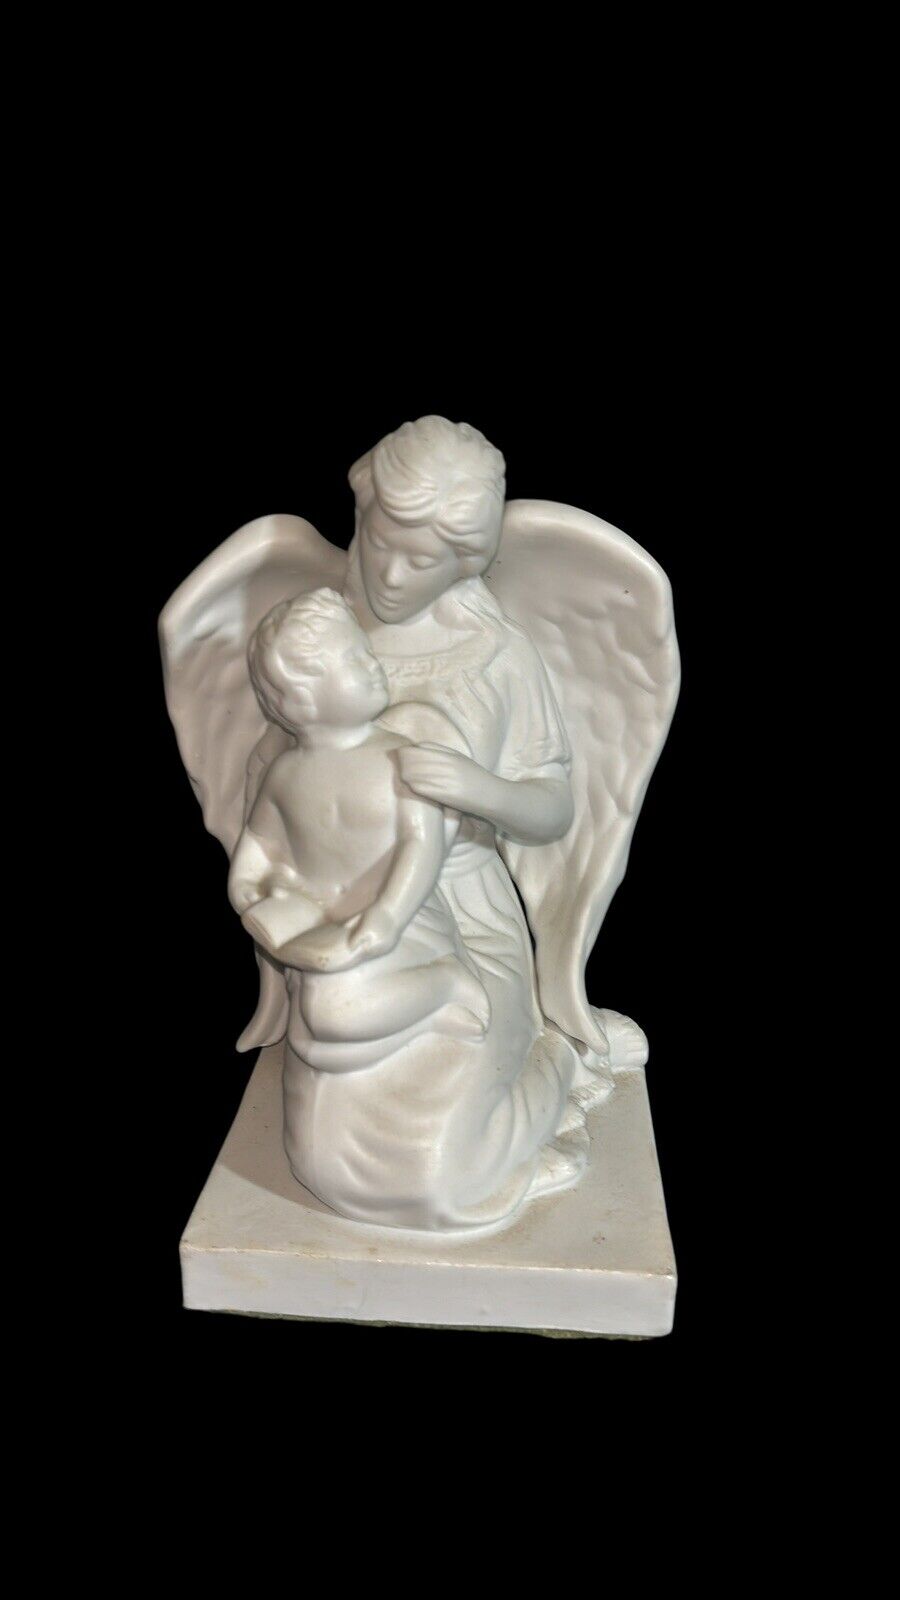 Teleflora Vintage Guardian Angel With Child White Bisque Statue 8” X 6” X 6”